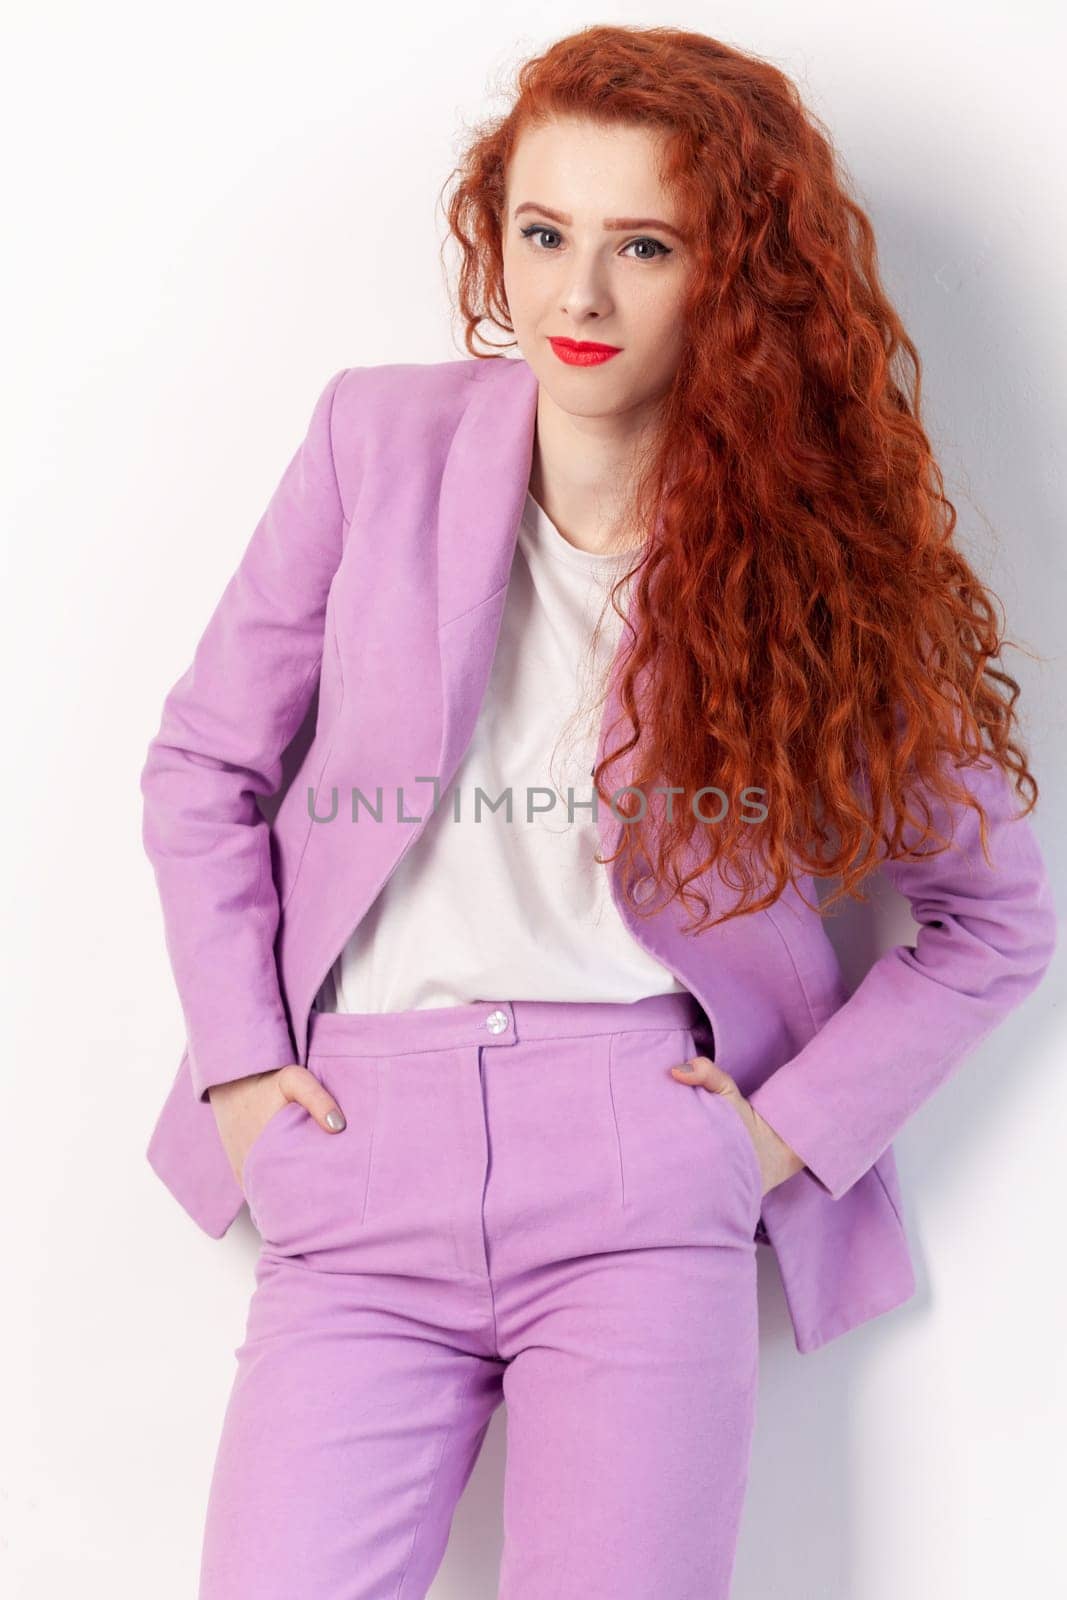 Portrait of self-confident attractive beautiful red haired woman with wavy hair, standing with hands in pockets, looking at camera, wearing lilac suit. Indoor studio shot isolated on gray background